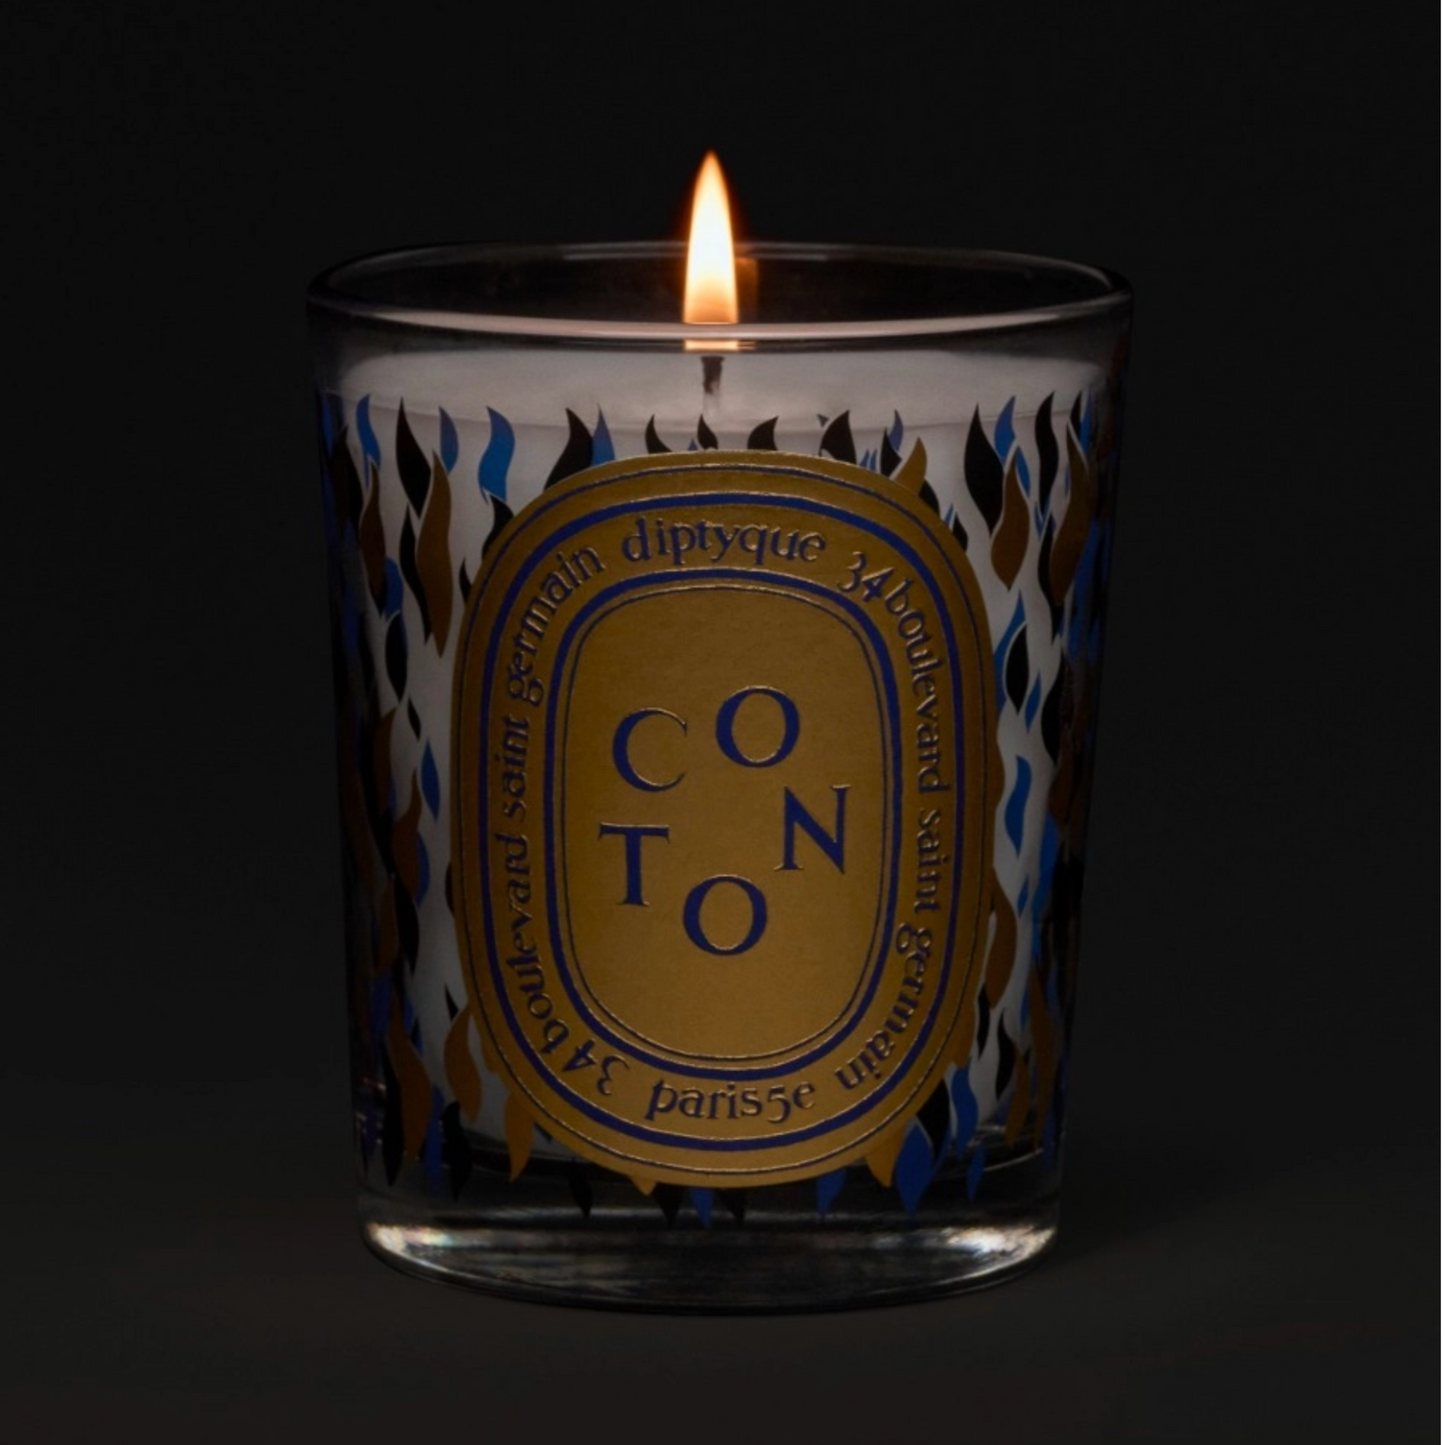 Diptyque - Classic Candle - Cotton - Limited Edition